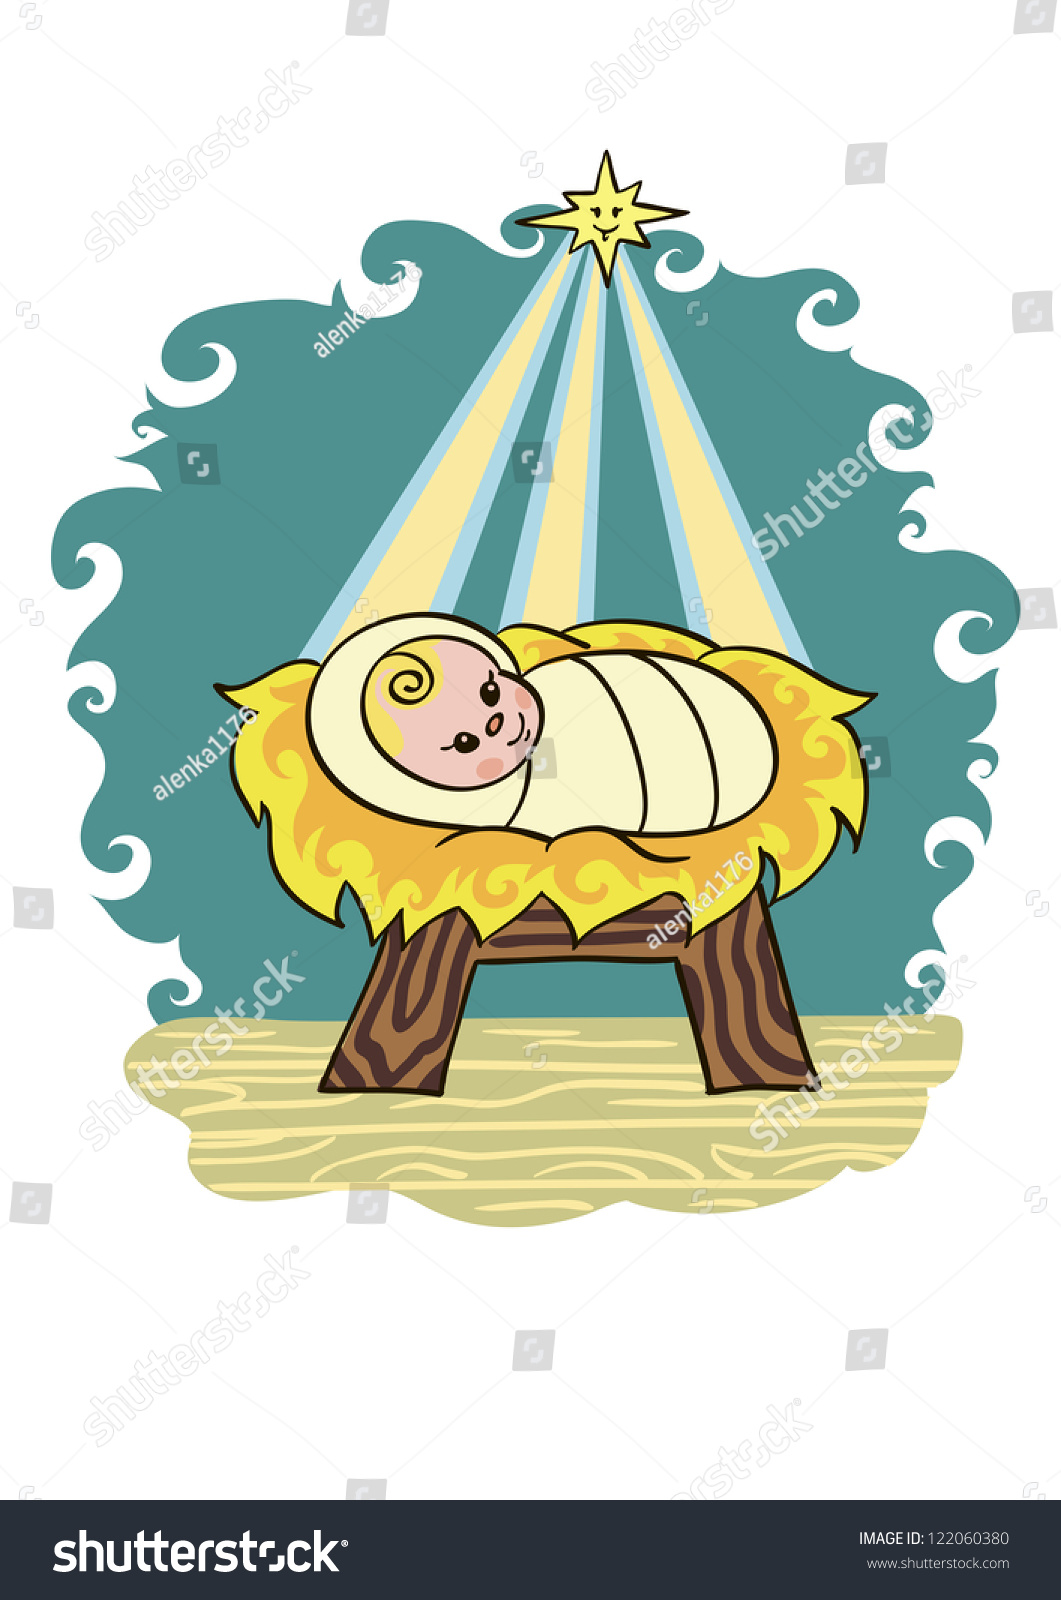 clipart of baby jesus in a manger - photo #31